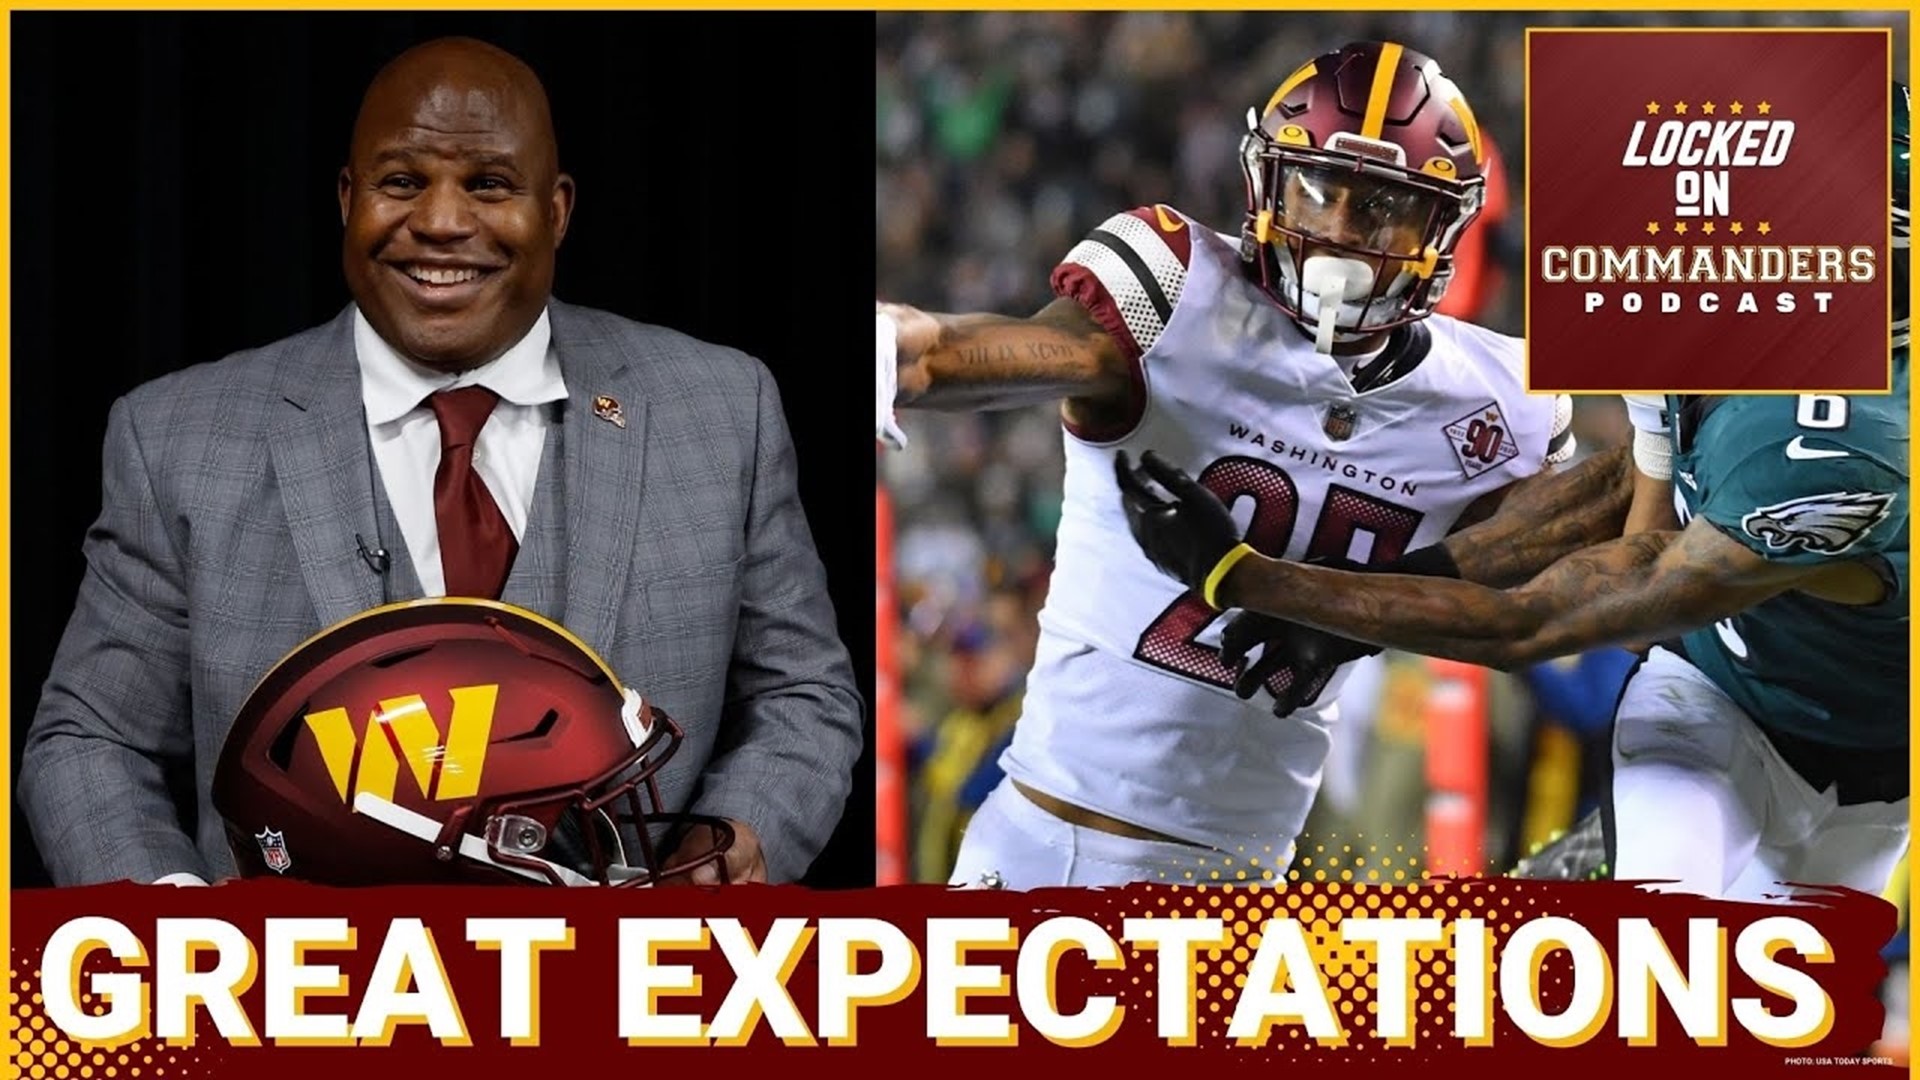 Washington Commanders Expectations with Eric Bieniemy, for